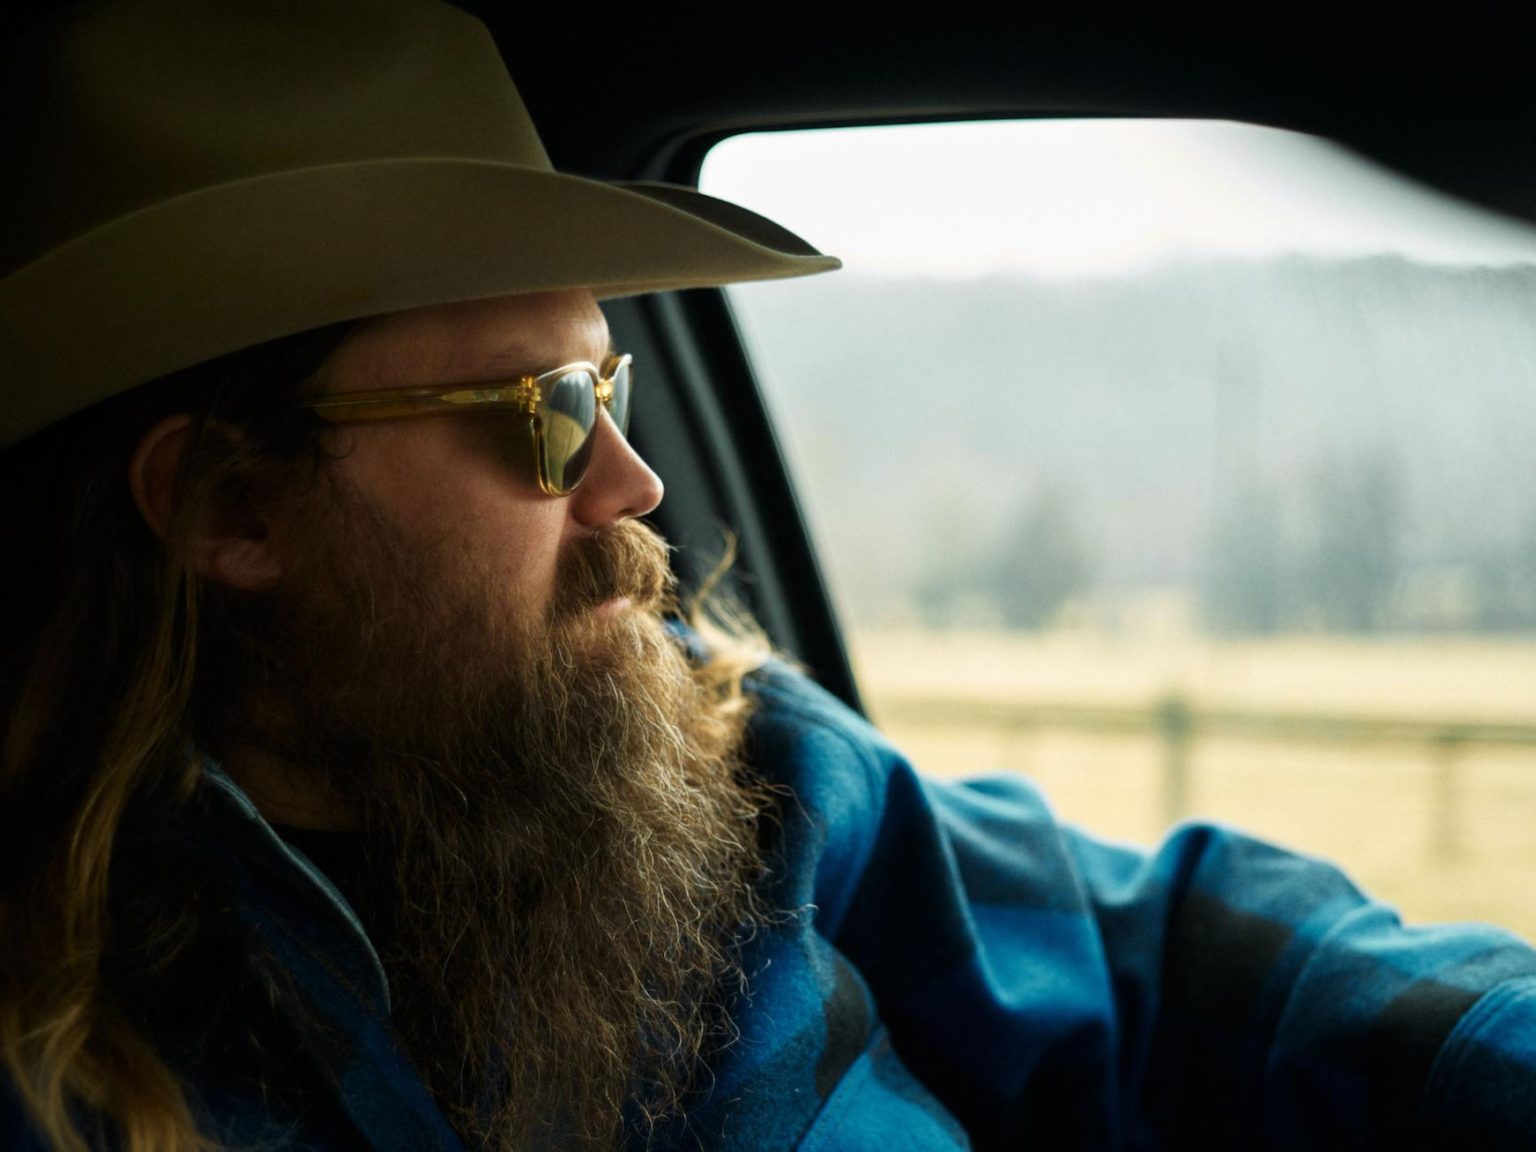 Signer-songwriter-producer Chris Stapleton has remade a classic song for Ram.